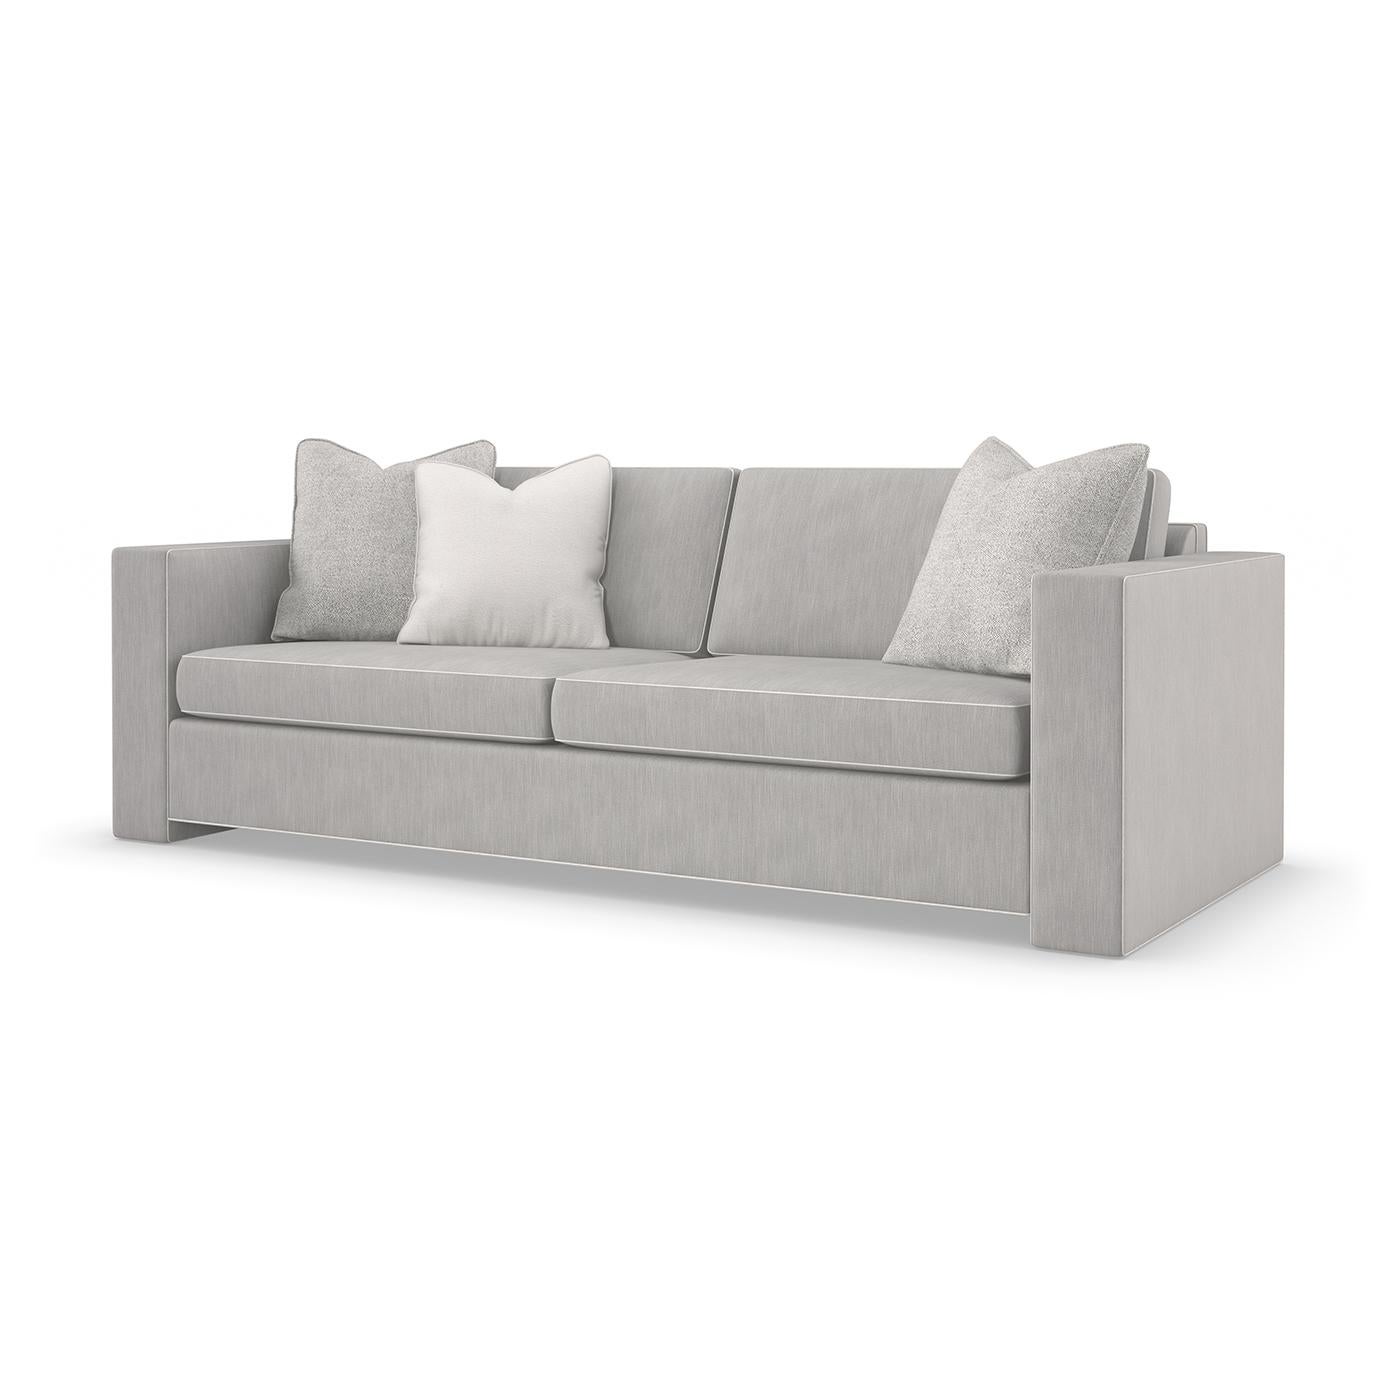 Drawing inspiration from Fashion Week in Paris, this sofa offers modern styling brought to life with warmth and texture. Tailored in a smoky taupe performance fabric, it features clean lines and linear forms outlined with contrasting welts in a